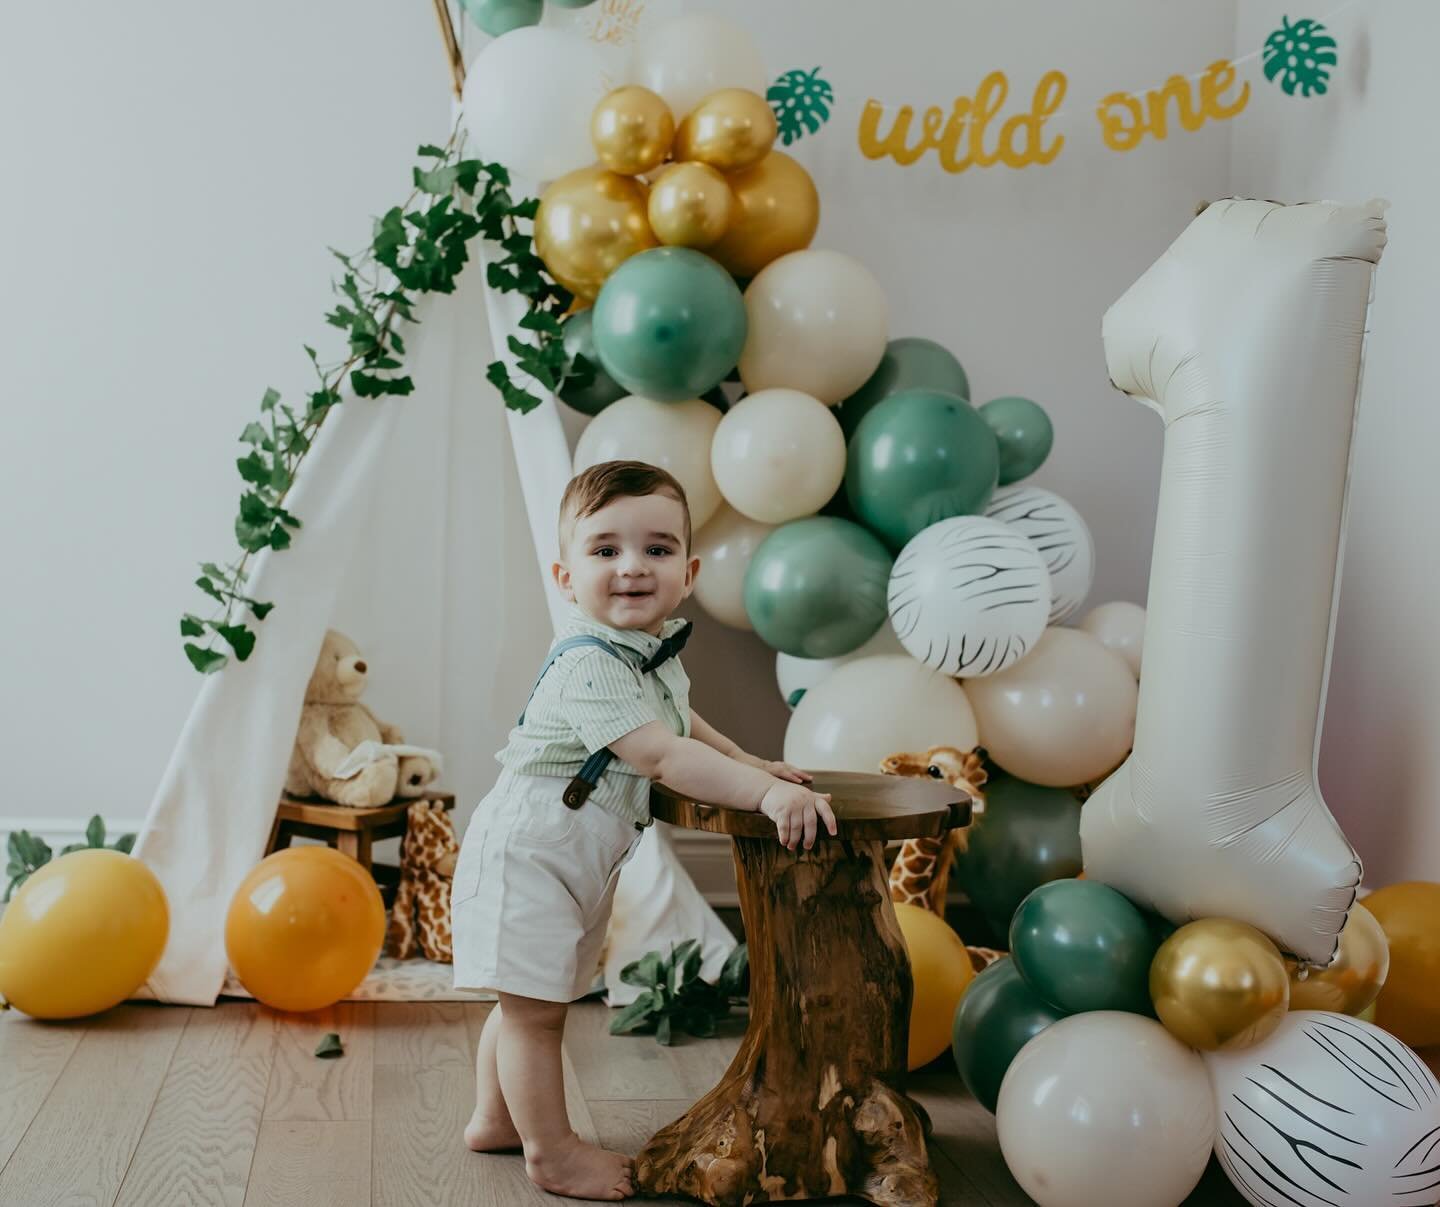 Can he be any cuter? 😍 

#cakesmash #cakesmashphotography #firstbirthdayphotoshoot #newbornphotography 
#ottawalifestylephotographer #ottawaphotographer #familyphotography #ottawafamilyphotographer 
#daphnepattisonphotography #ottawalifestylephotogr